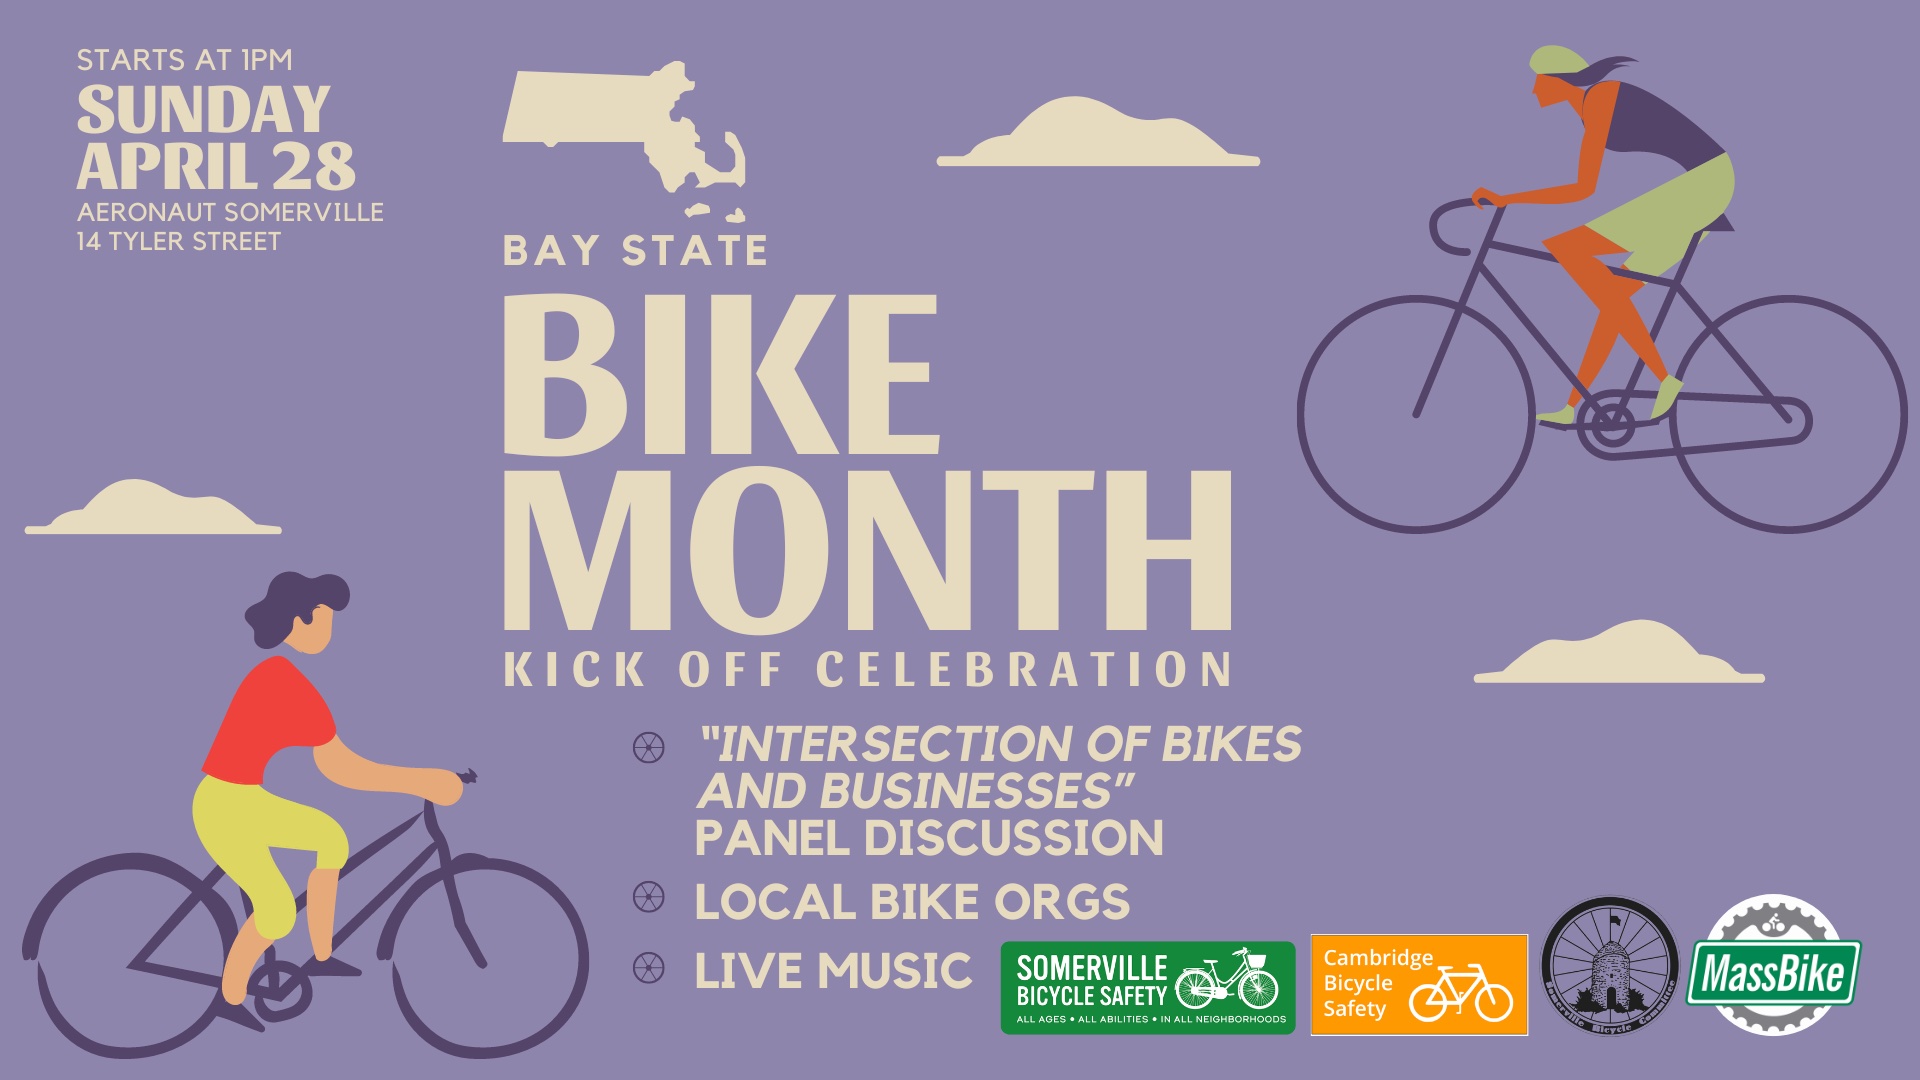 Promo image for "Bay State Bike Month Kickoff Celebration" with text on a lavender background next to drawings of people riding bikes.